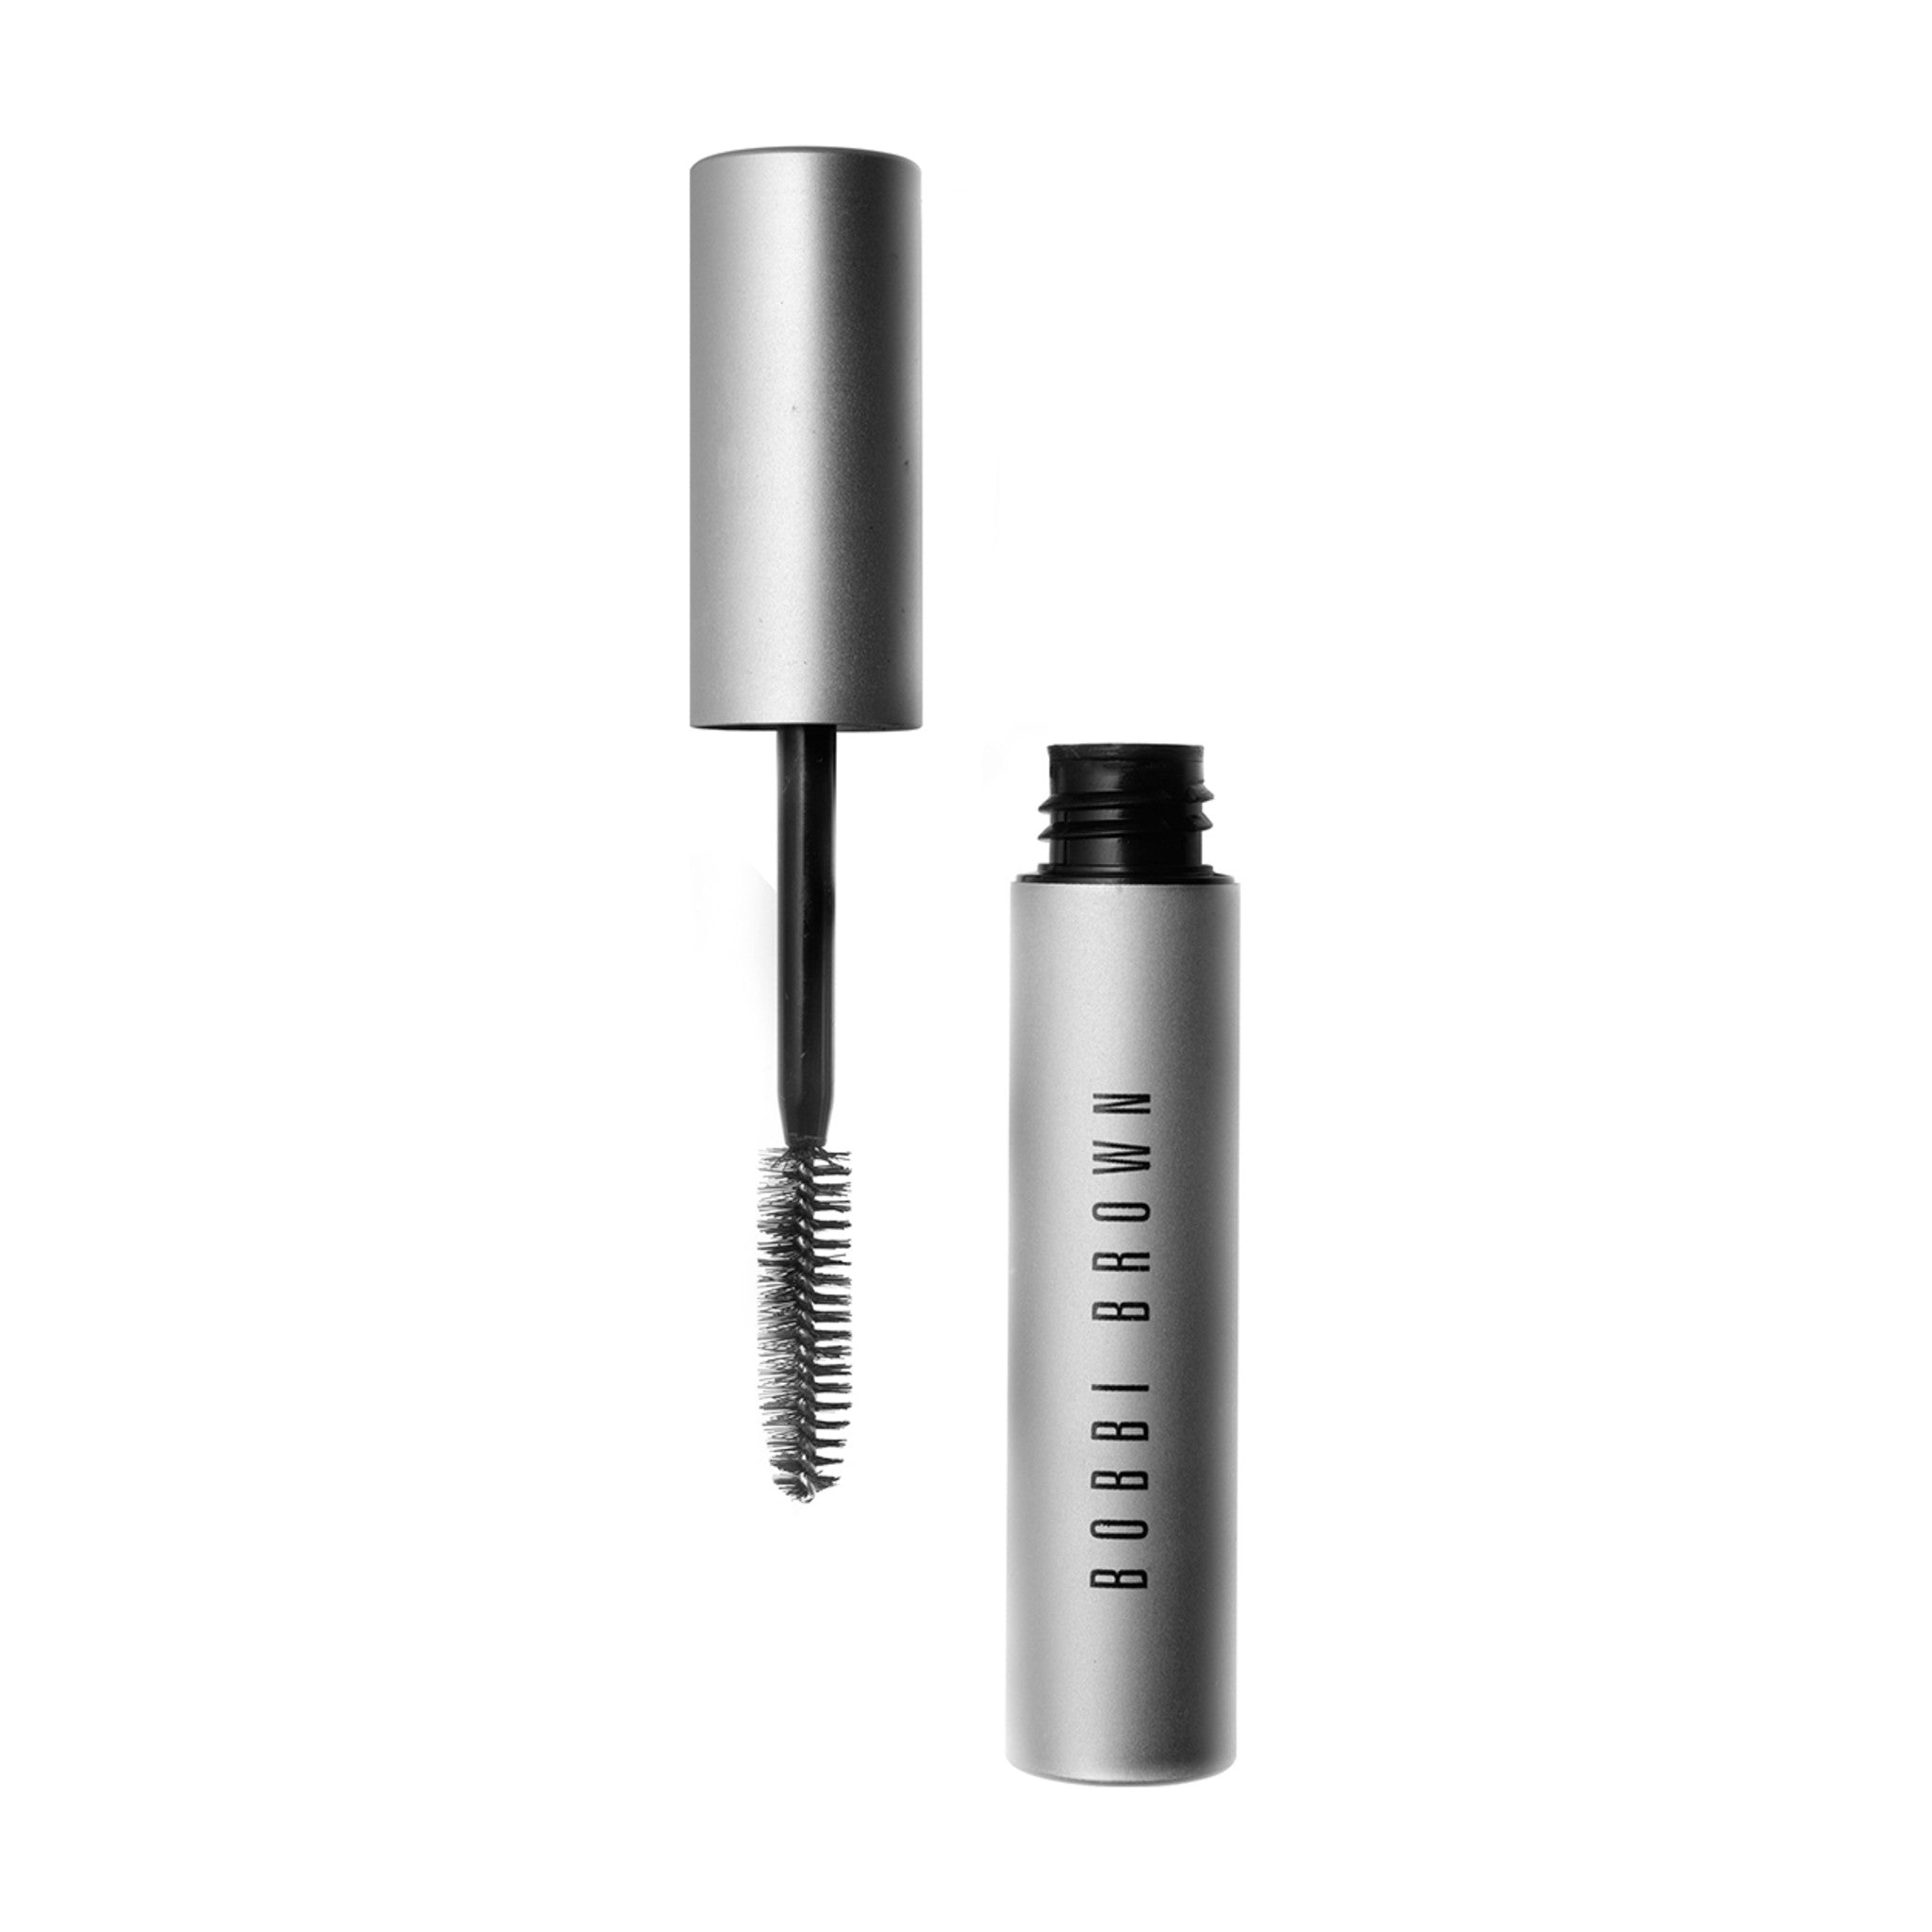 Bobbi Brown Smokey Eye Mascara main image. This product is in the color black